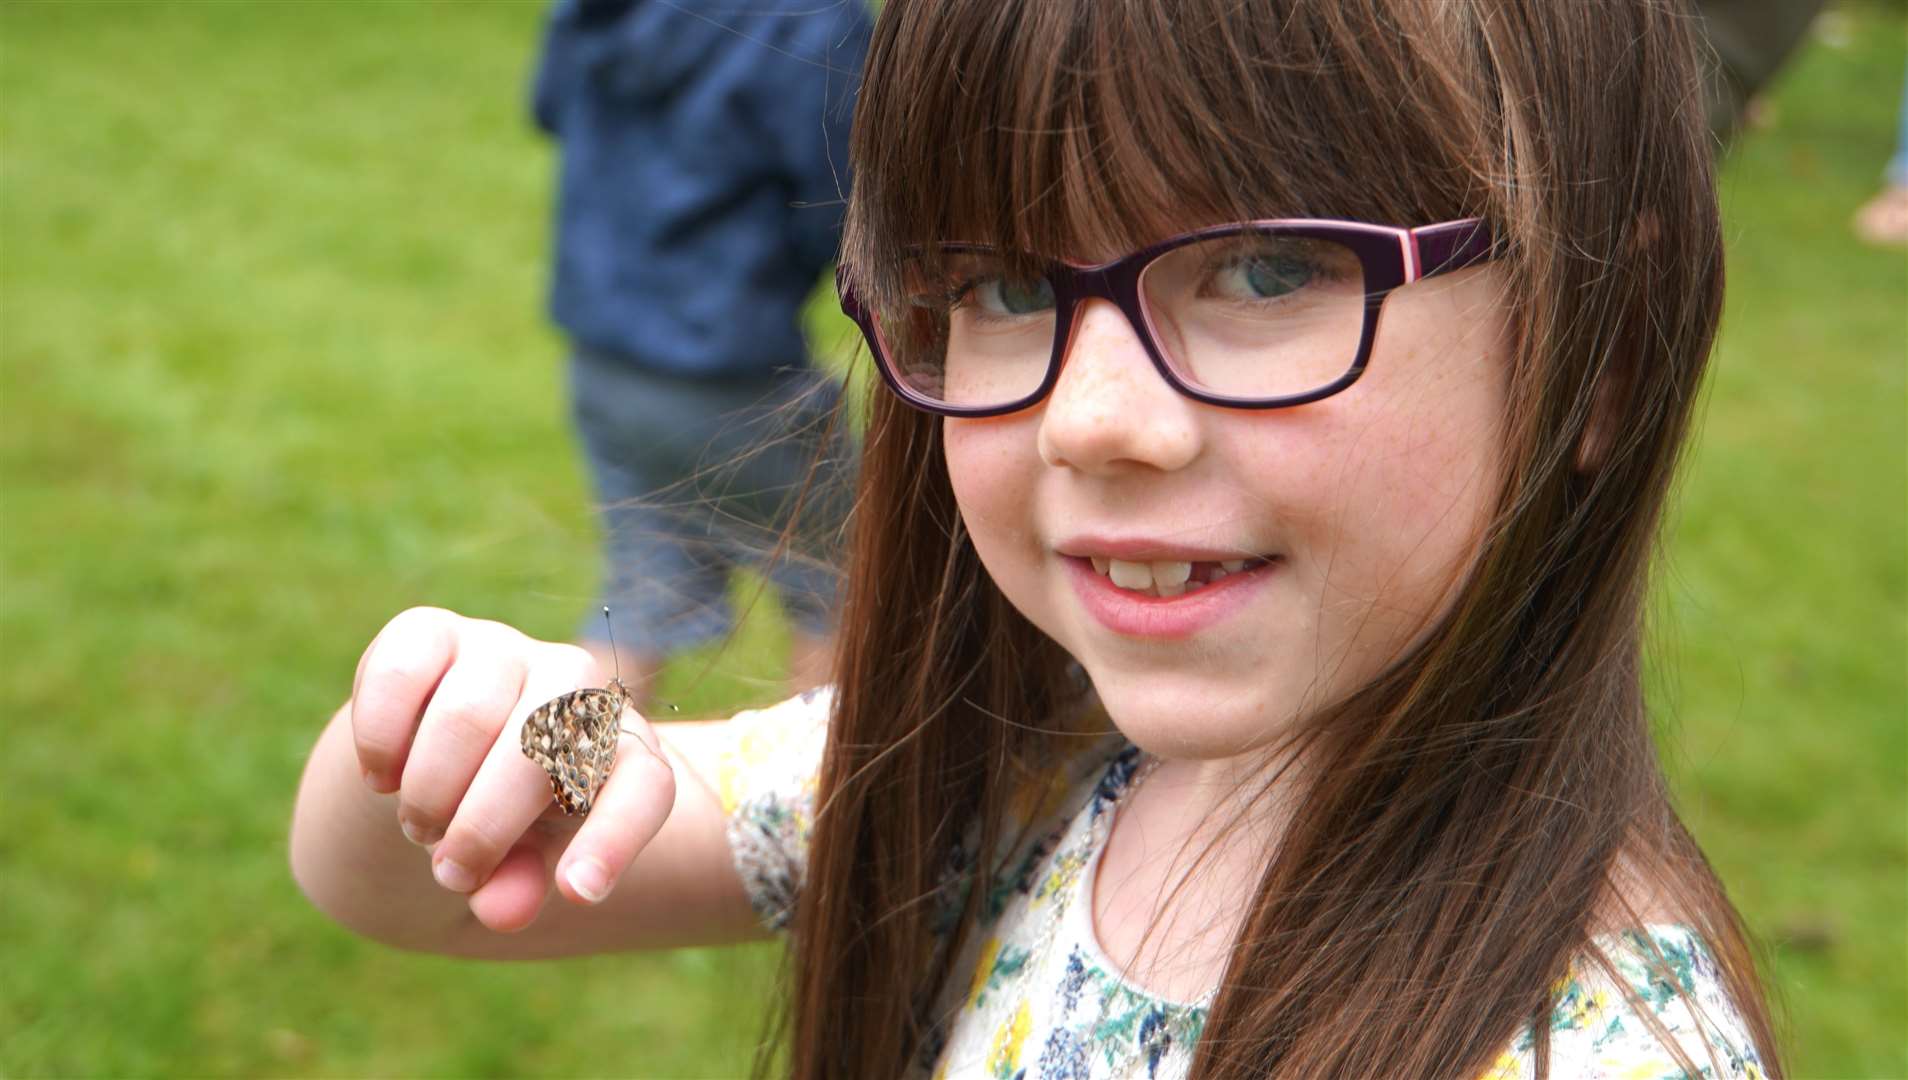 Eight-year-old Ellie was at the event last year and loved releasing the butterflies.